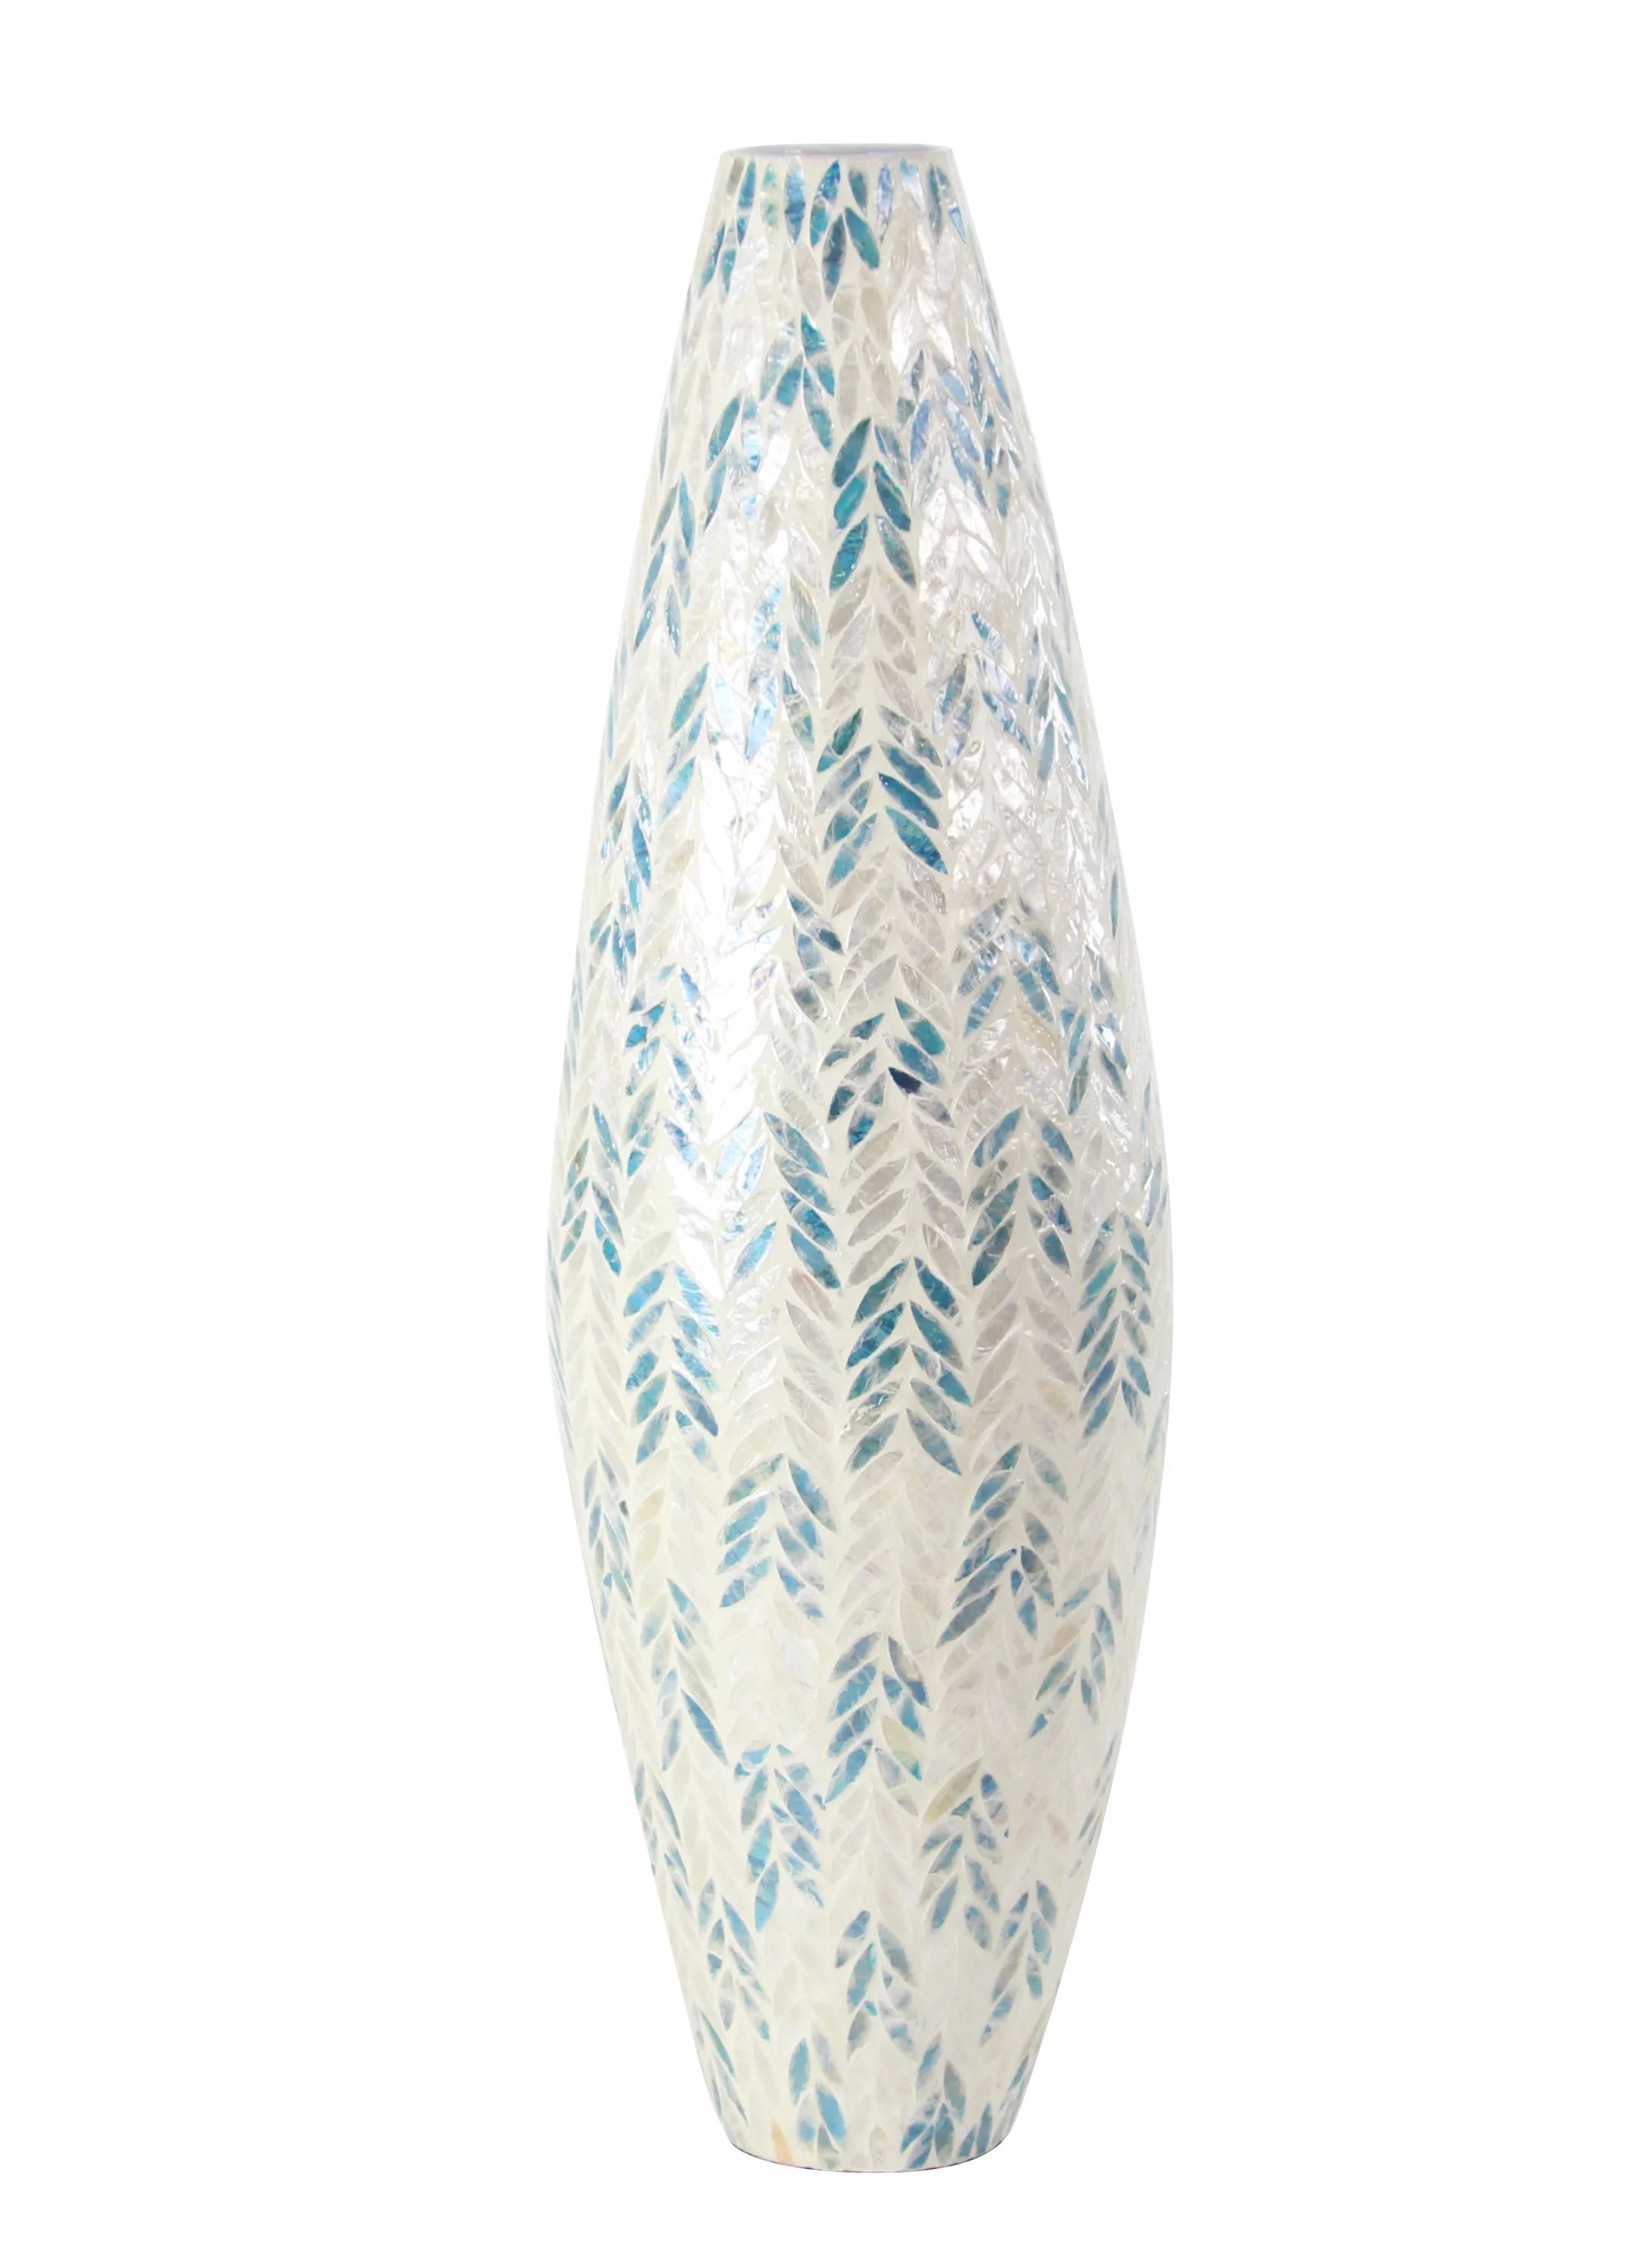 DecMode 33" Handmade Tall Mosaic White Mother of Pearl Vase with Blue Accents | Walmart (US)